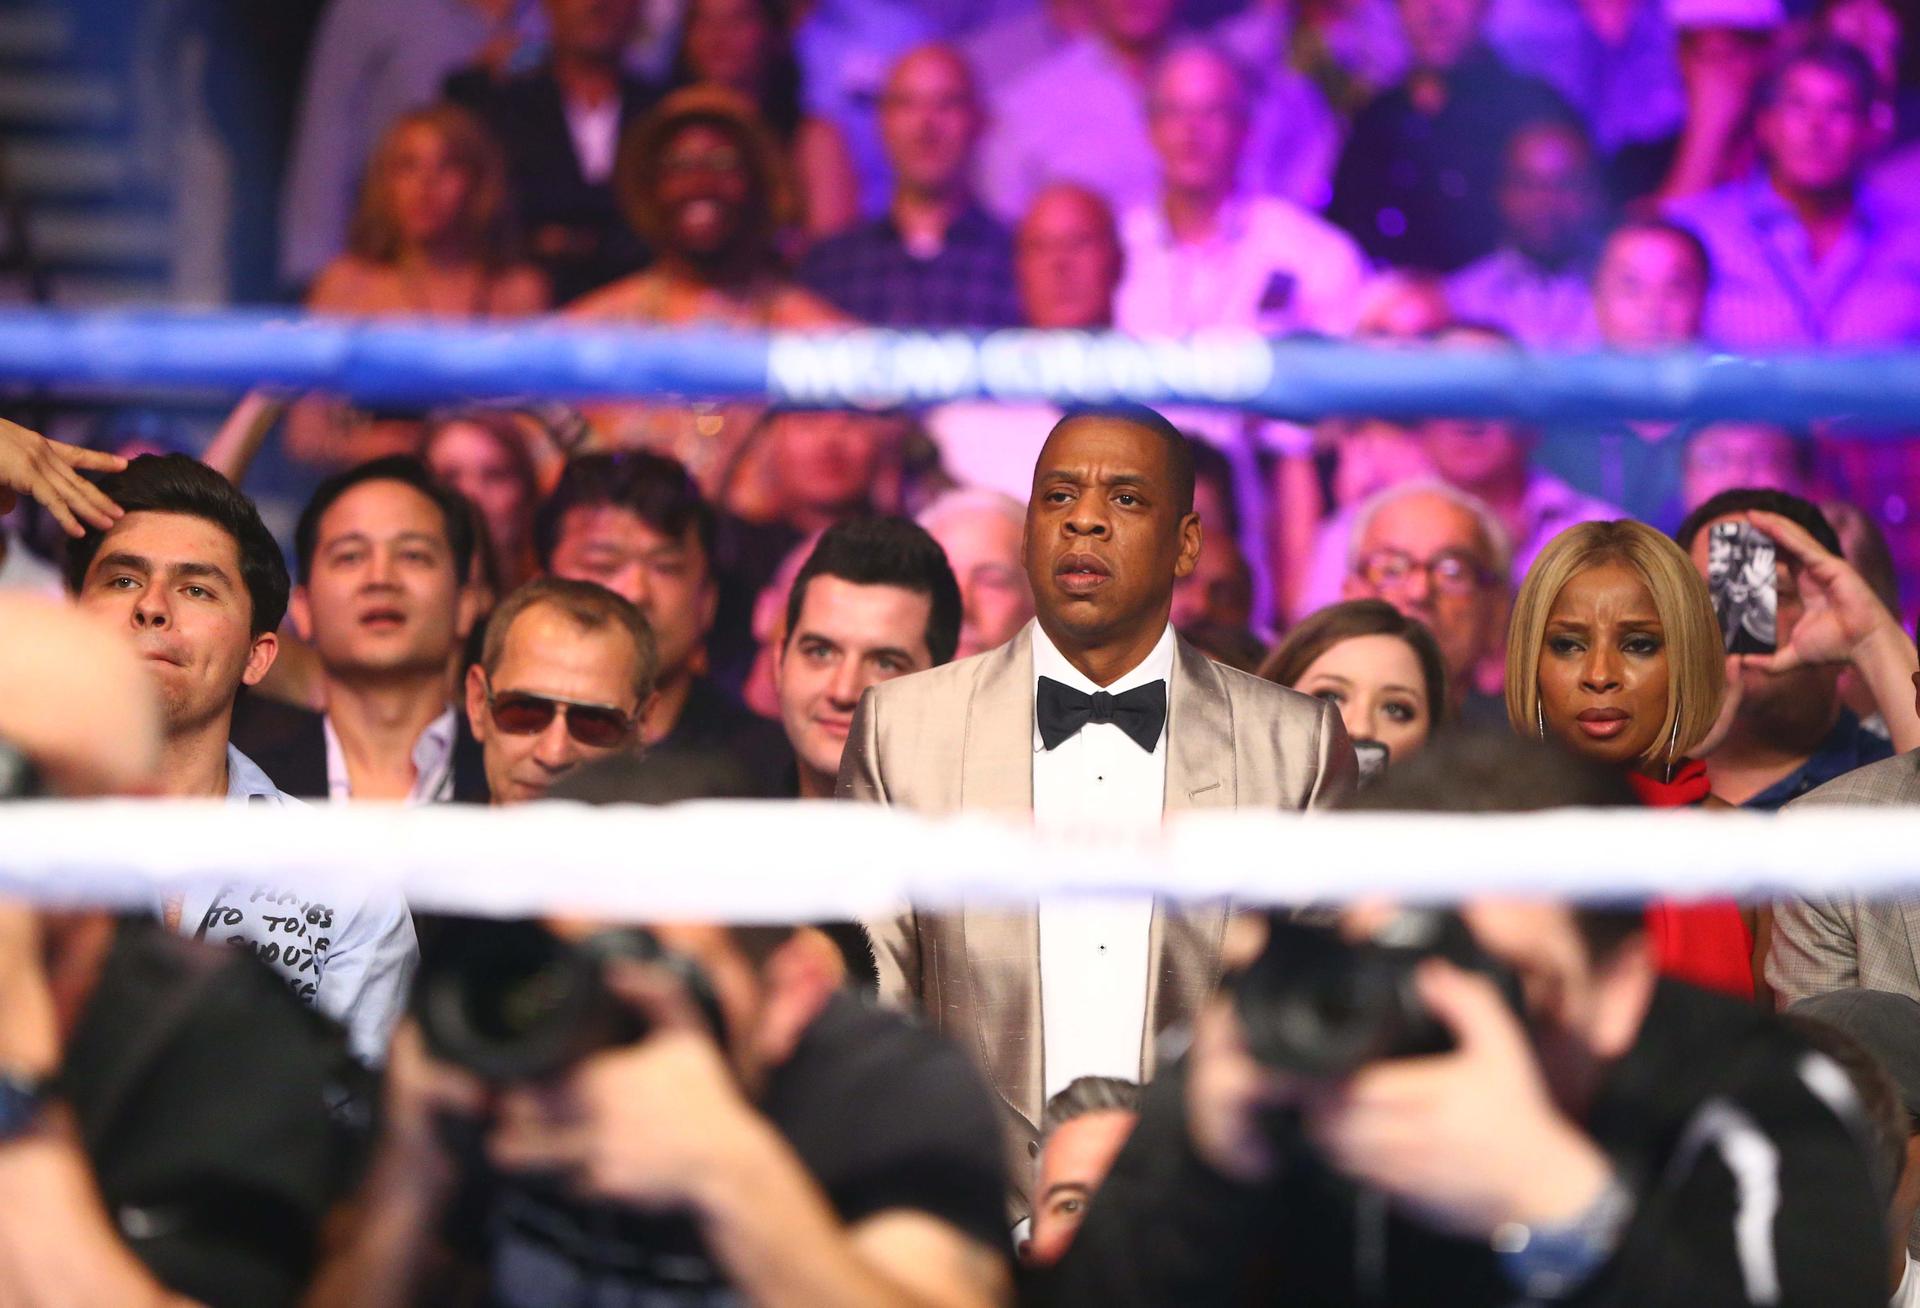 Recording artist Jay Z in attendance during the world welterweight championship bout between Floyd Mayweather and Manny Pacquiao at MGM Grand Garden Arena.